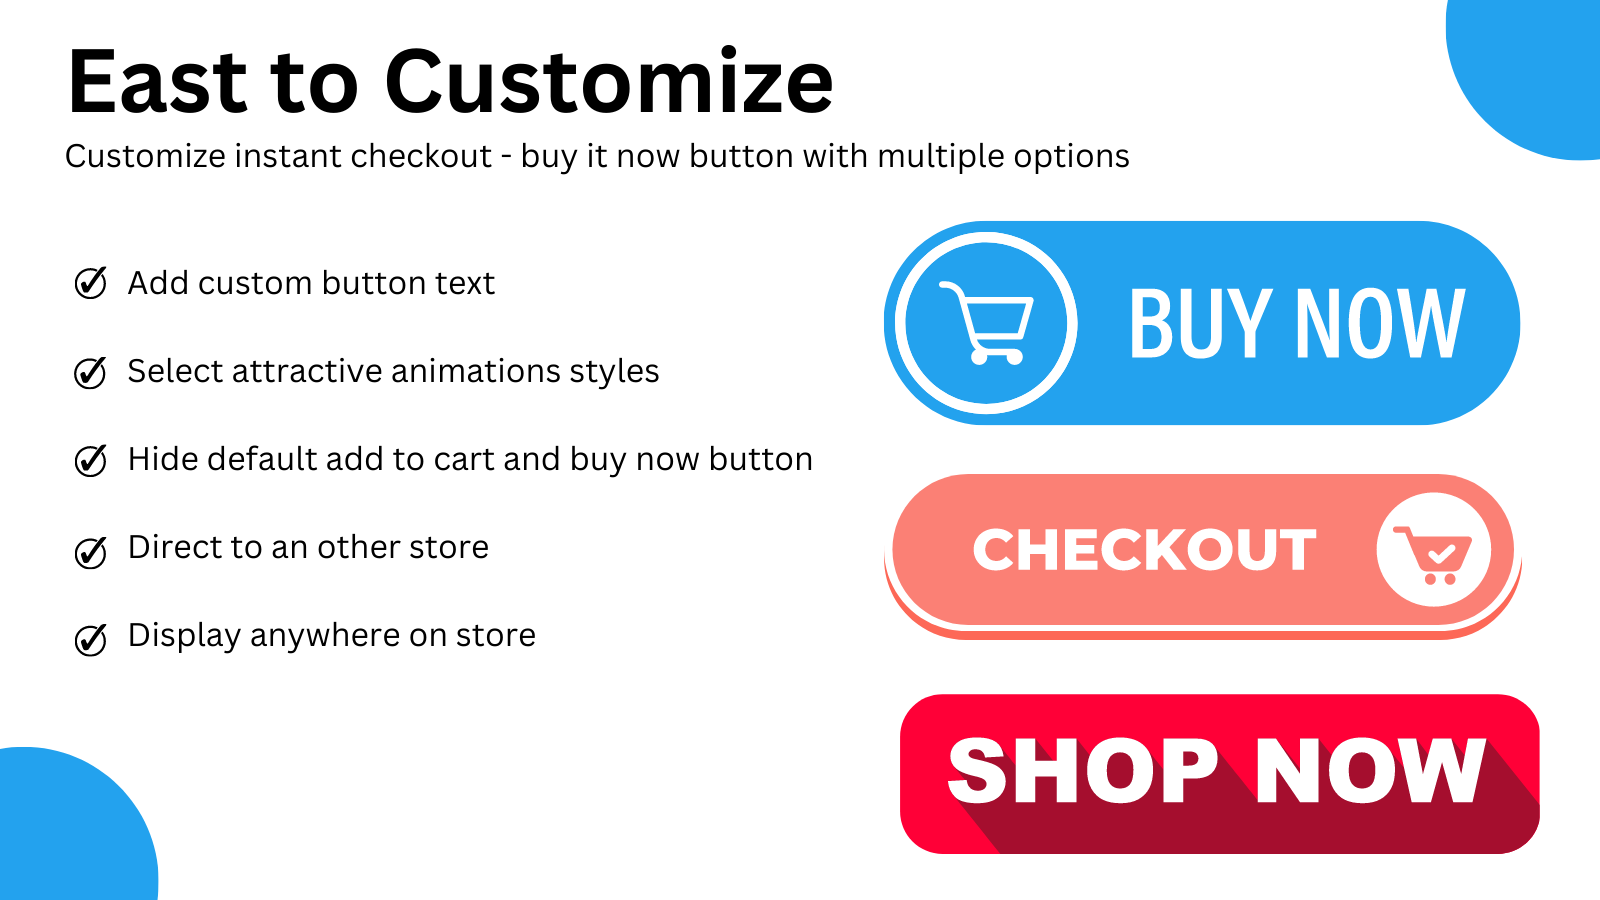 Direct Checkout Link to bypass add to cart option for direct buy